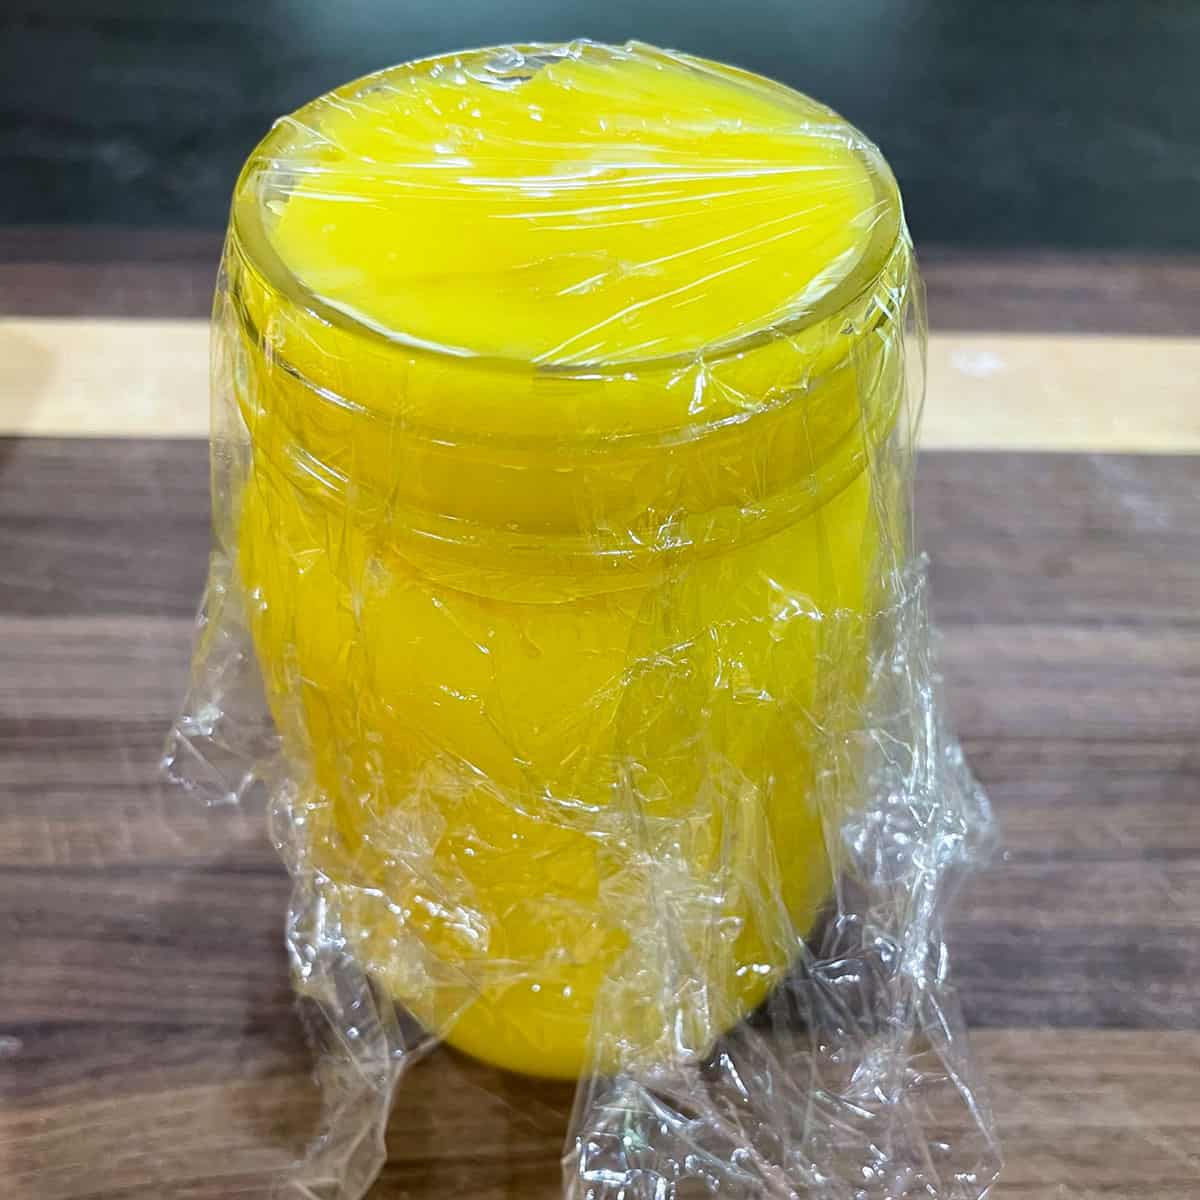 plastic wrap pressed against the curd that is in a glass jar.